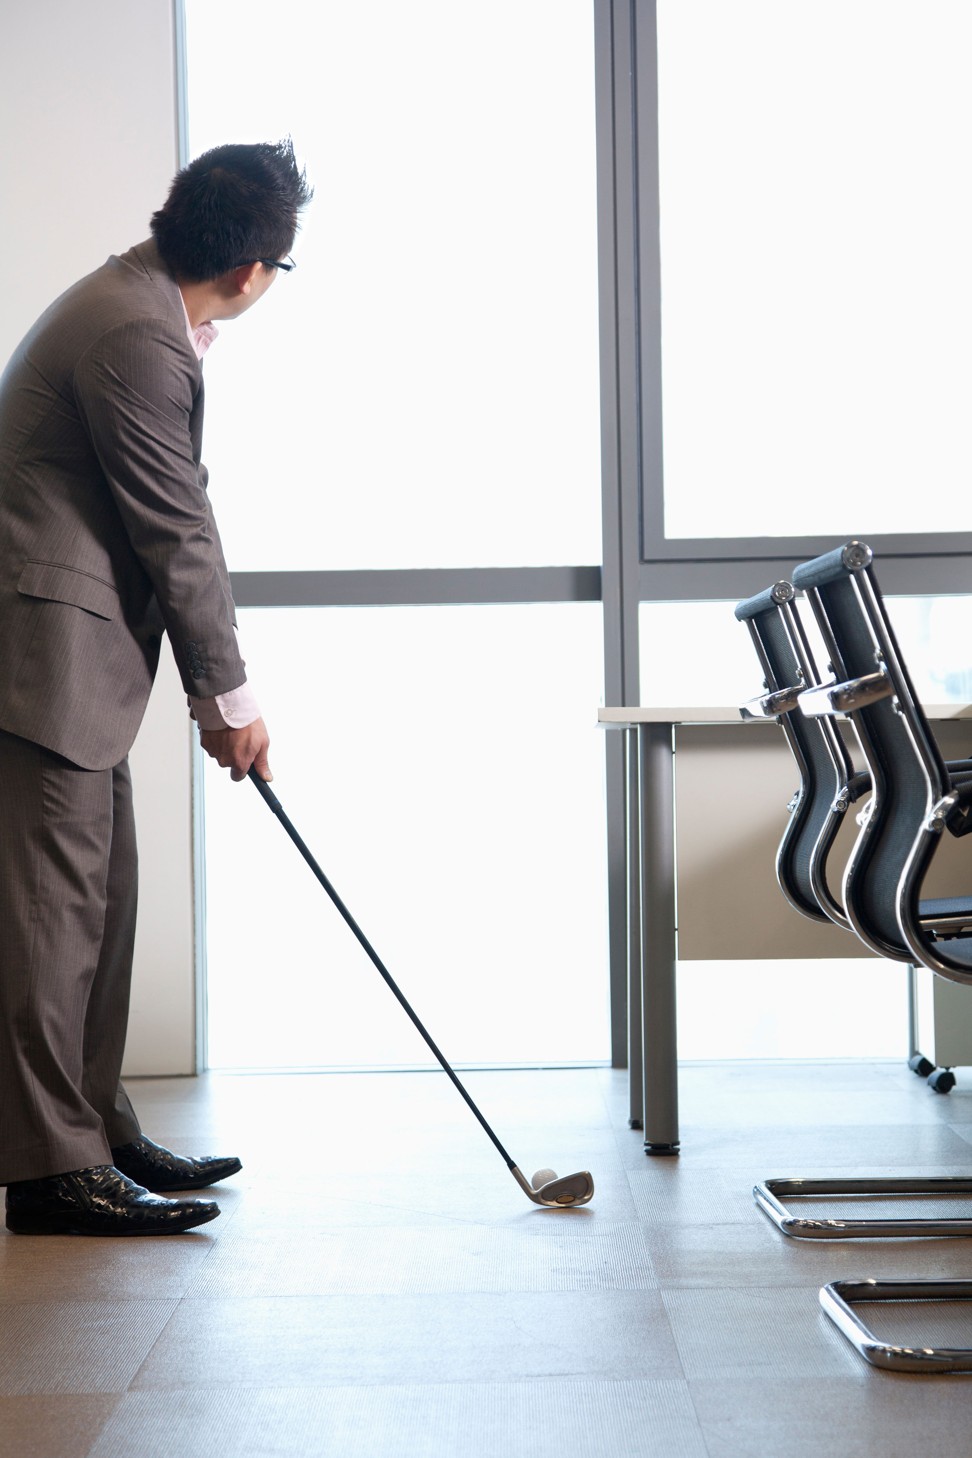 Giving workers short breaks every half-hour to walk around would be beneficial, the study reveals. Photo: Alamy